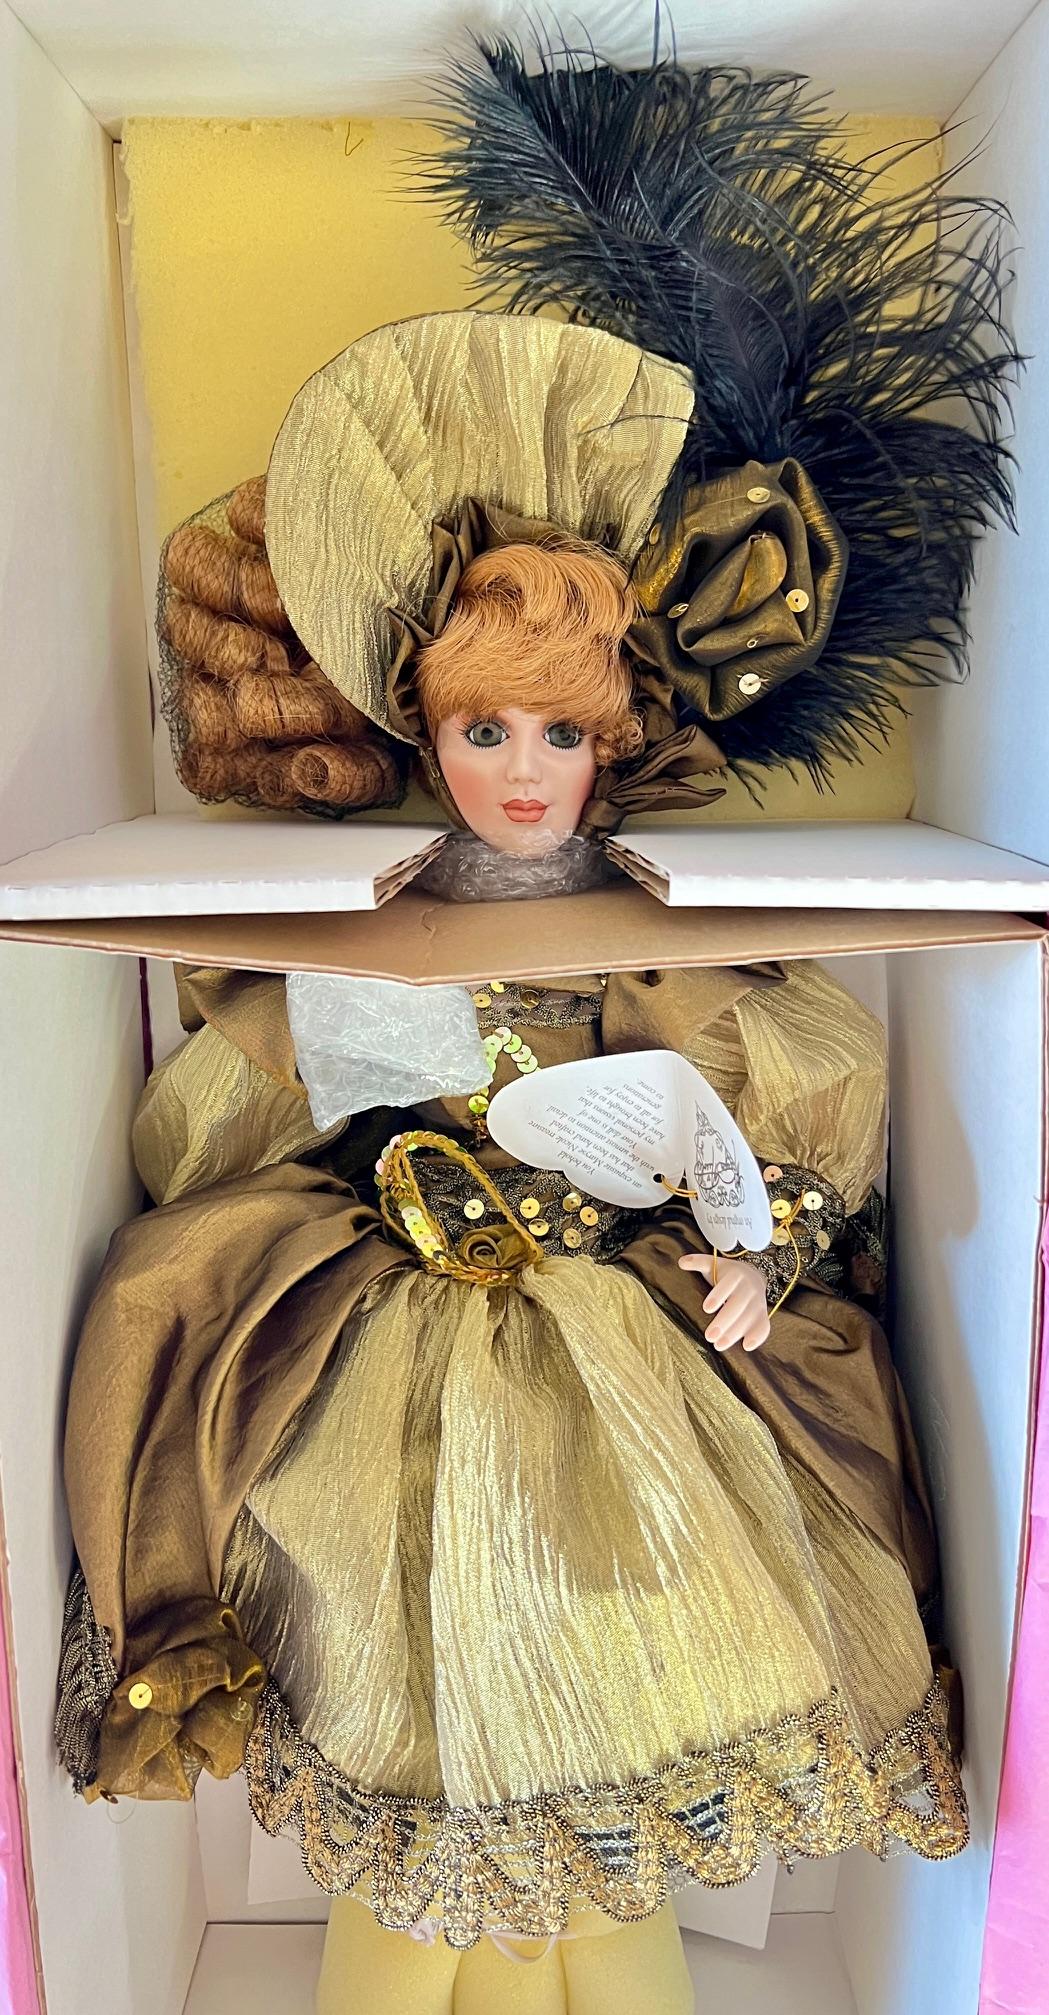 2PC FRANKLIN MONT HEIRLOOM DOLLS IN BOXES - GOLD AND BLACK